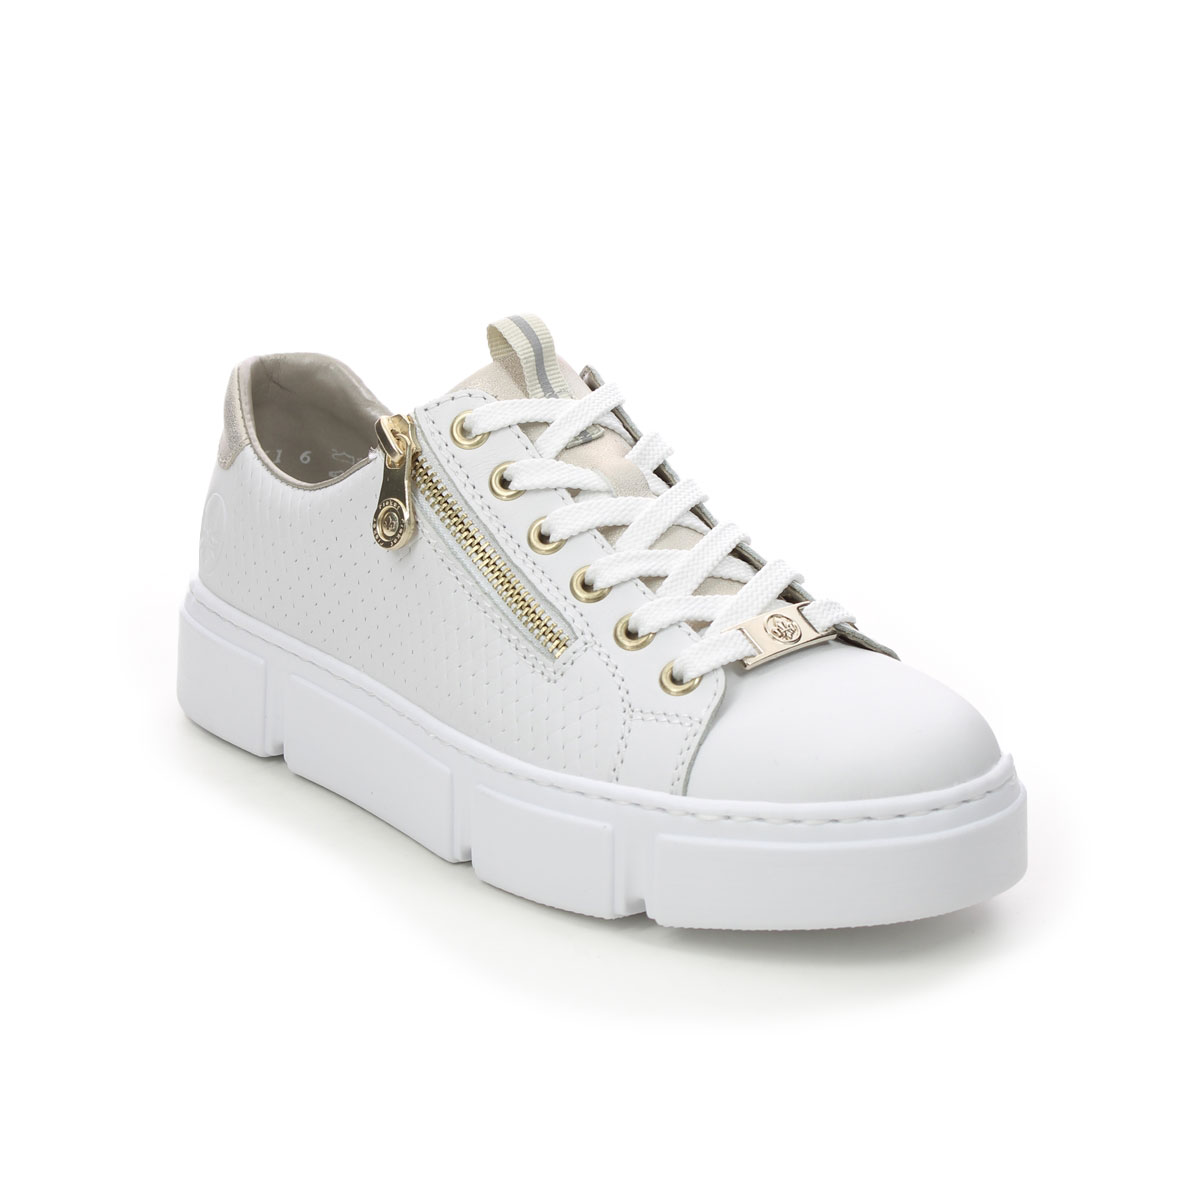 Rieker N5932-80 WHITE LEATHER Womens trainers in a Plain Leather in Size 37